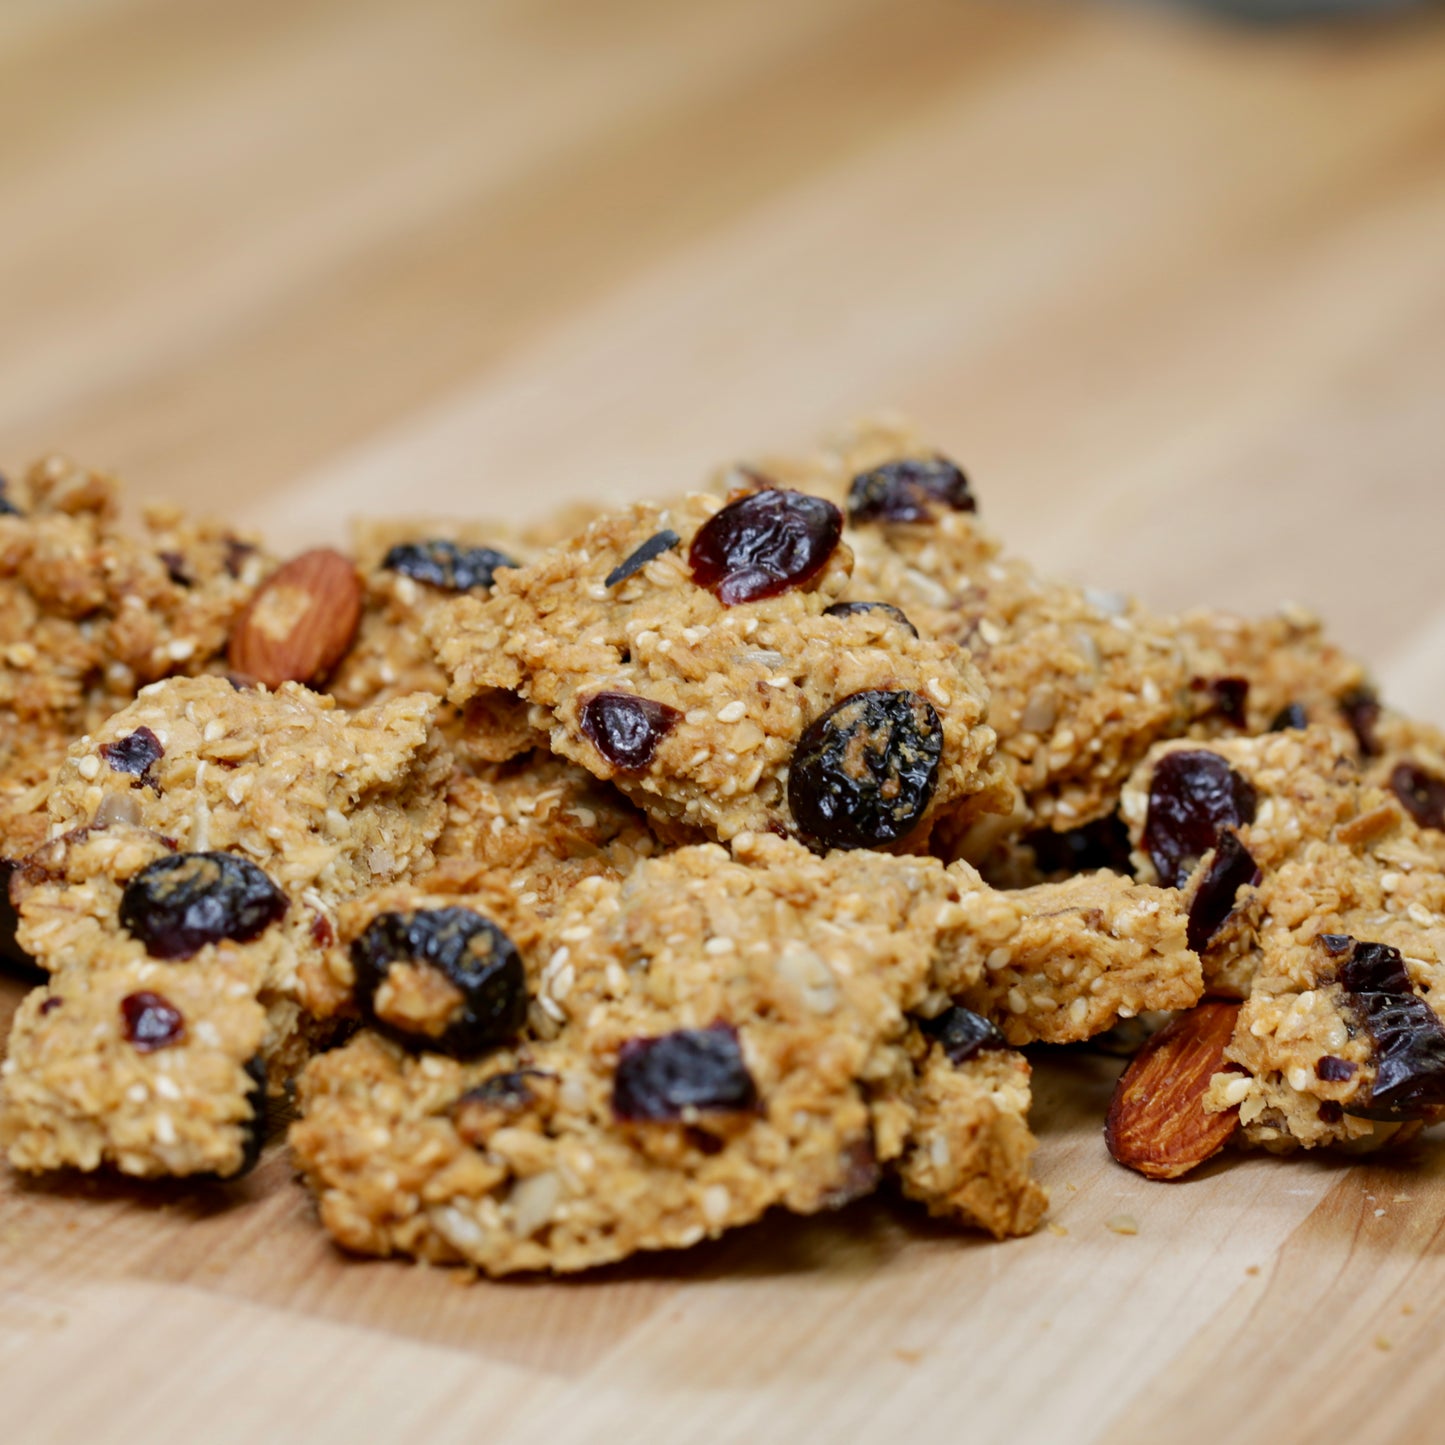 Big Sky Bread Company Whole Grain Granola. A whole grain oatmeal base featuring apple juice sweetened cranberries, California almonds, wildflower honey and a perfect blend of sesame and sunflower seeds.